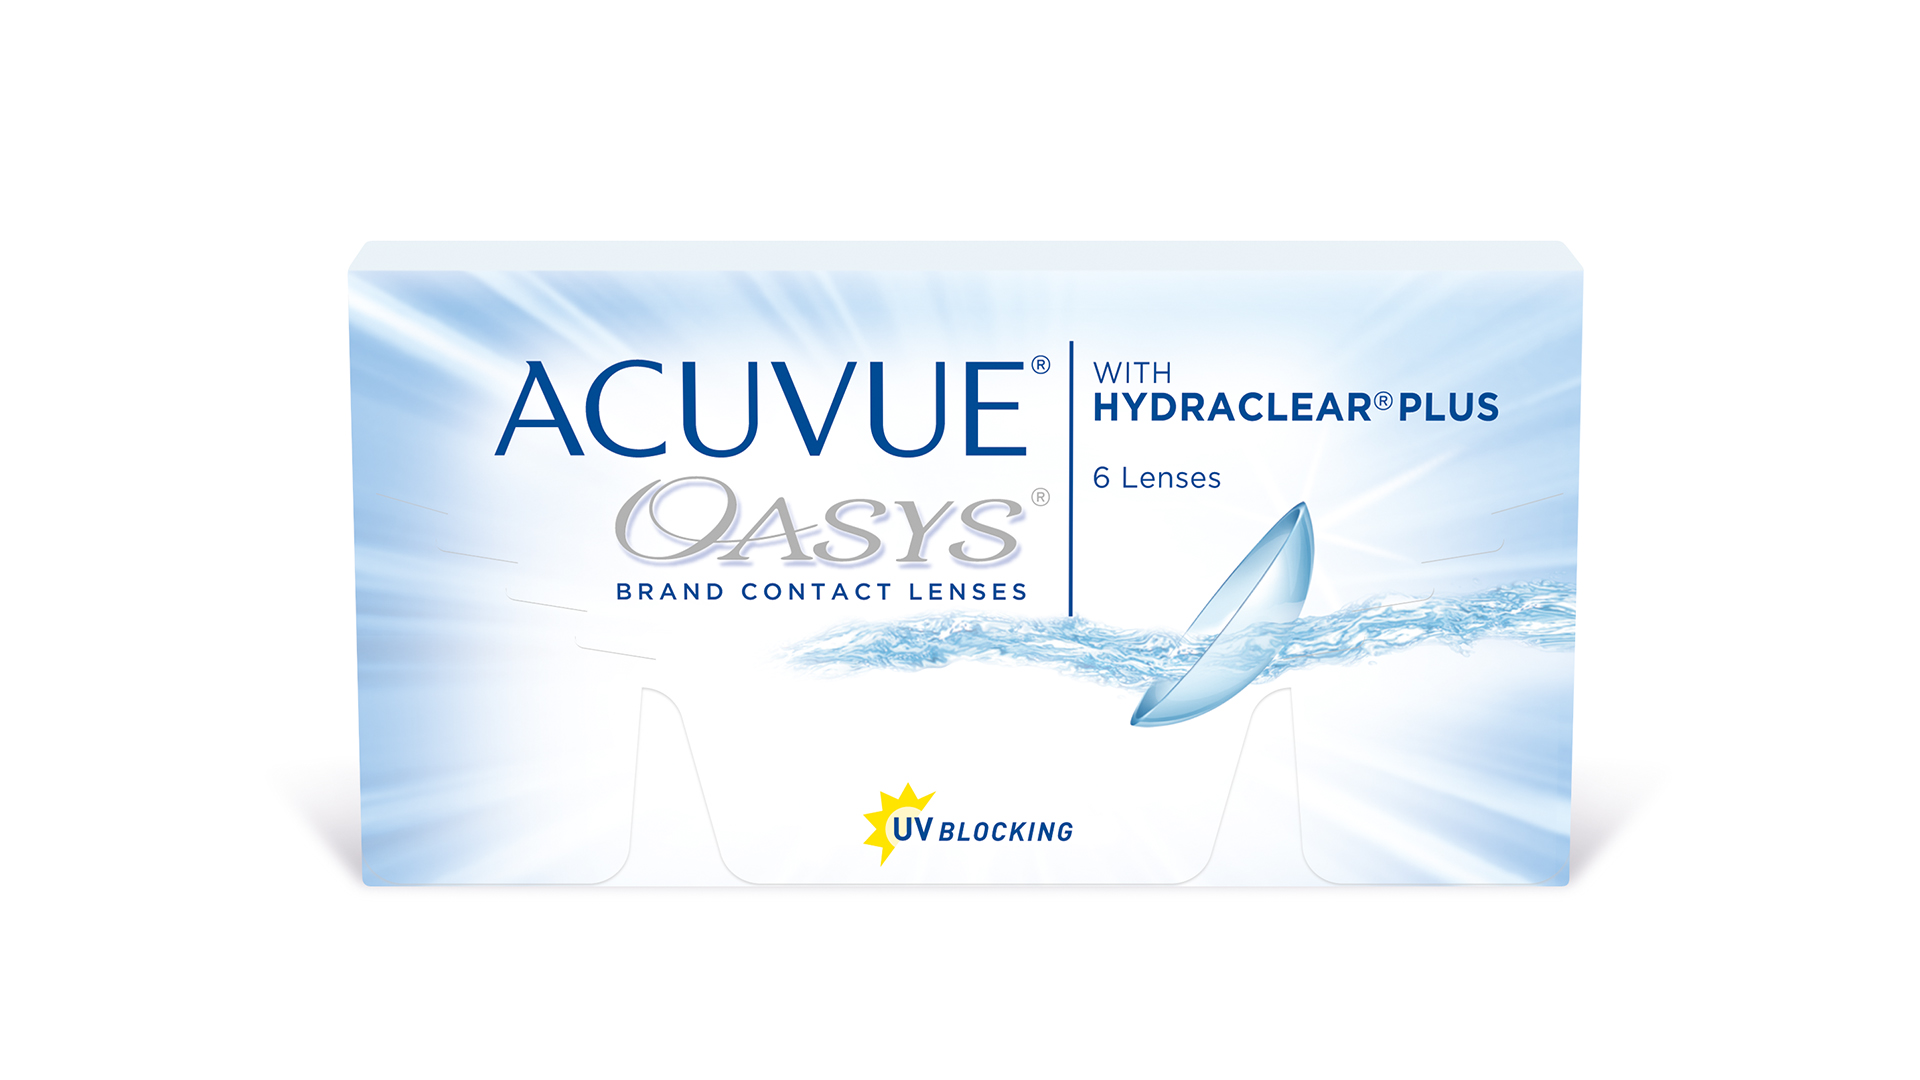 ACUVUE® OASYS 2-WEEK with HYDRACLEAR® PLUS